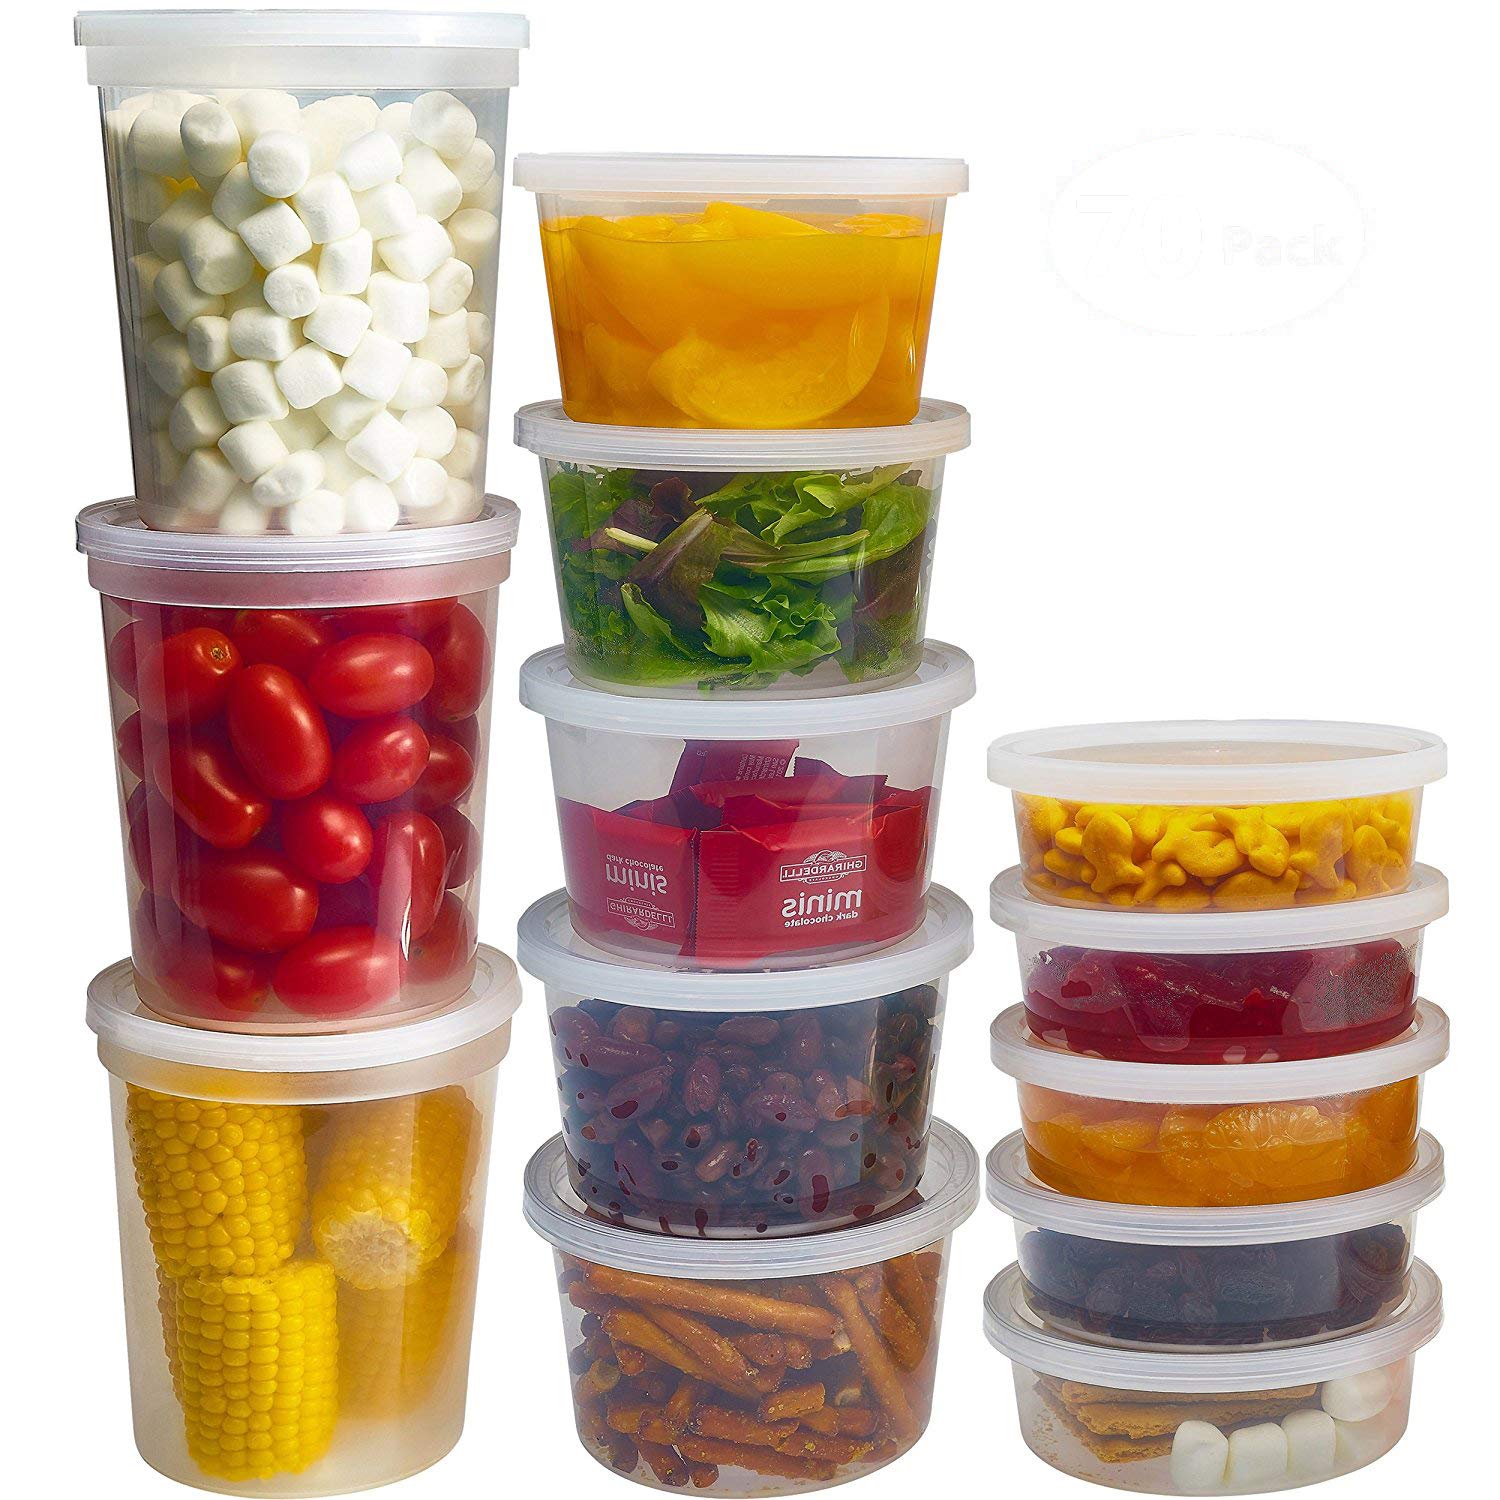 Choice 8 oz. Round Deli Containter w/ Lid (Microwavable)